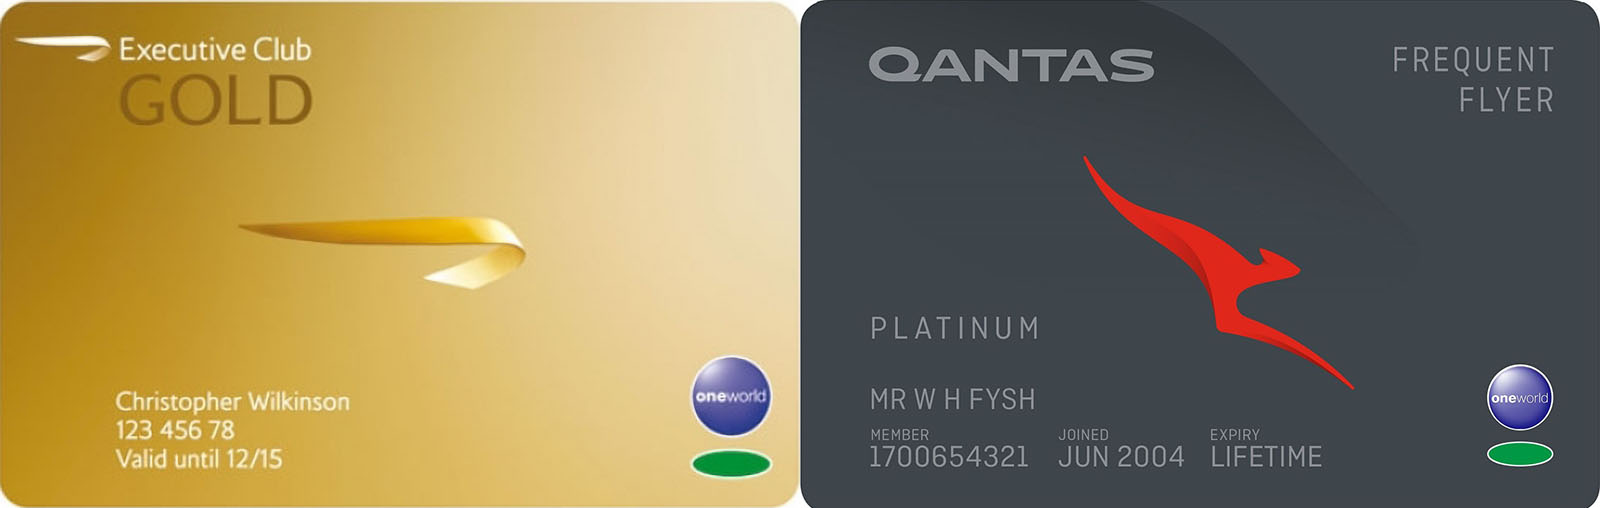 Lifetime oneworld Emerald frequent flyer cards of British Airways and Qantas